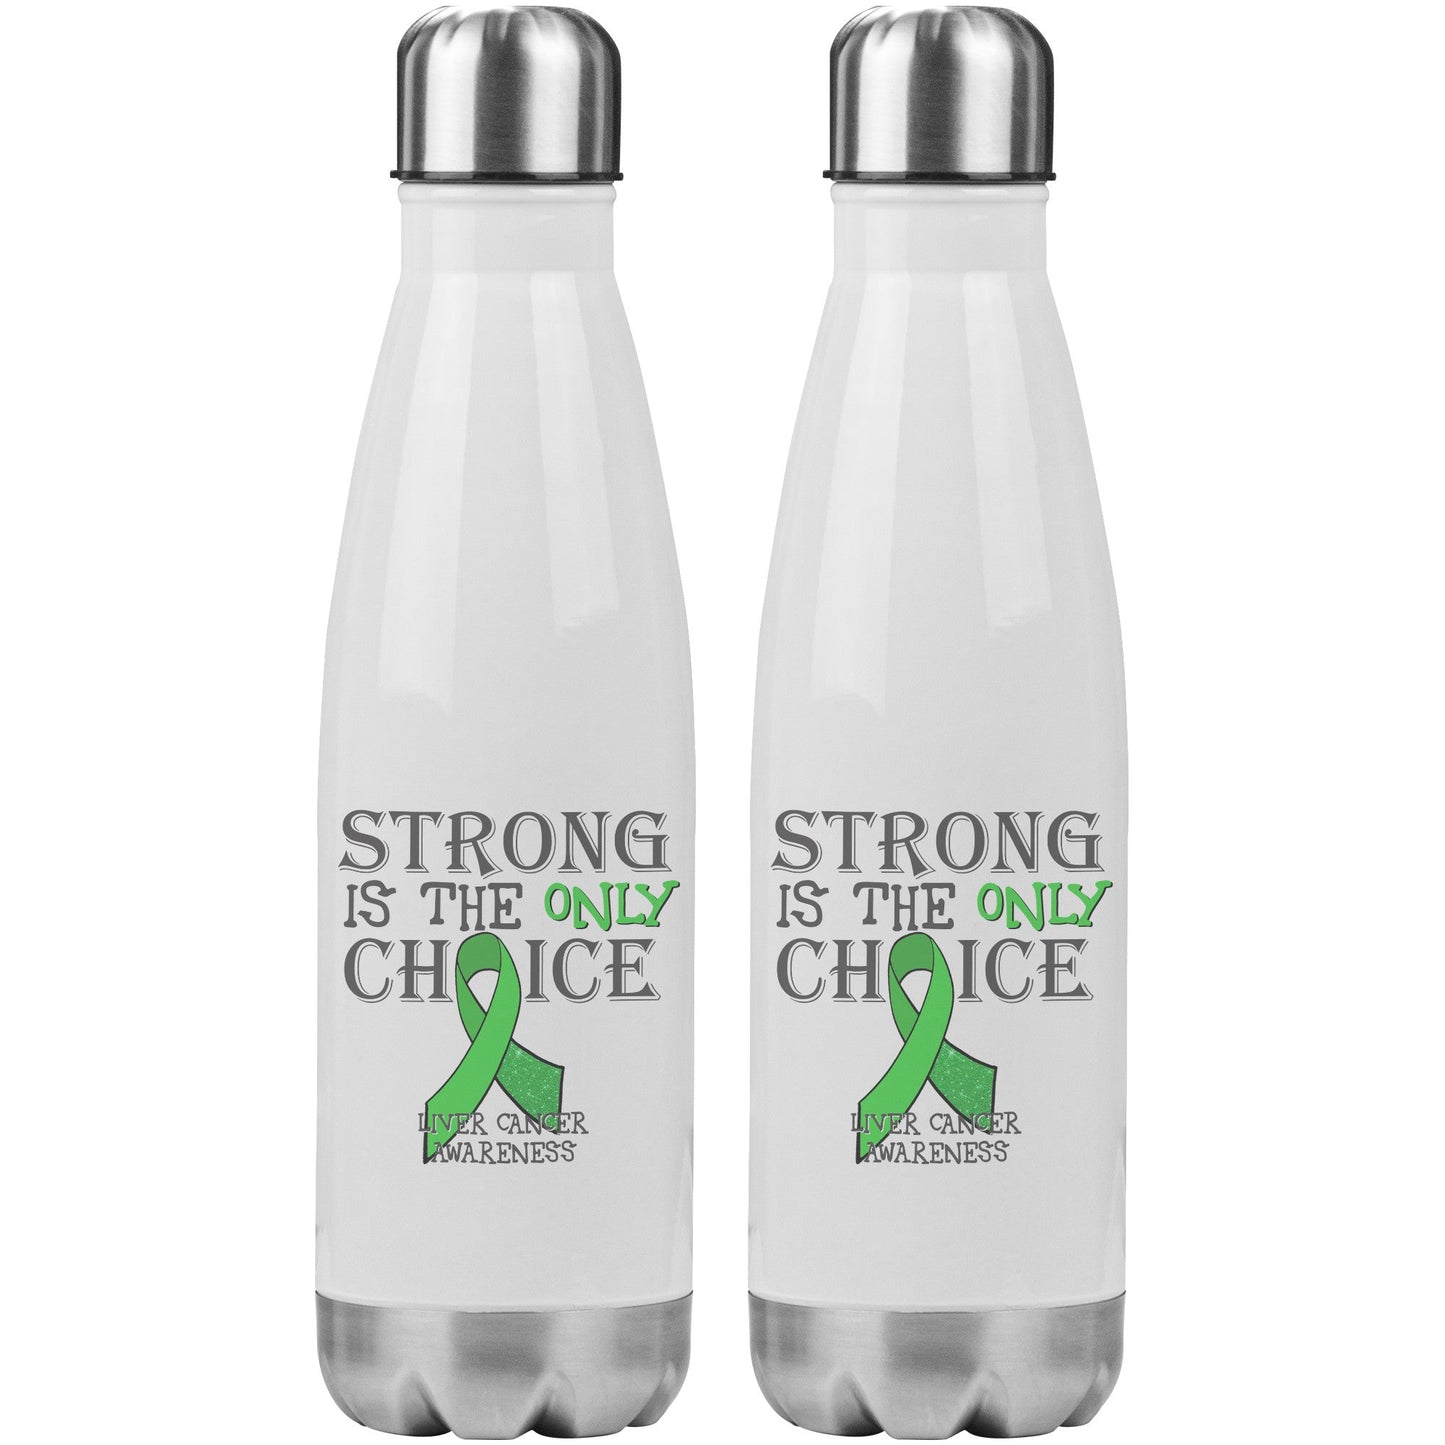 Strong is the Only Choice -Liver Cancer Awareness 20oz Insulated Water Bottle |x|